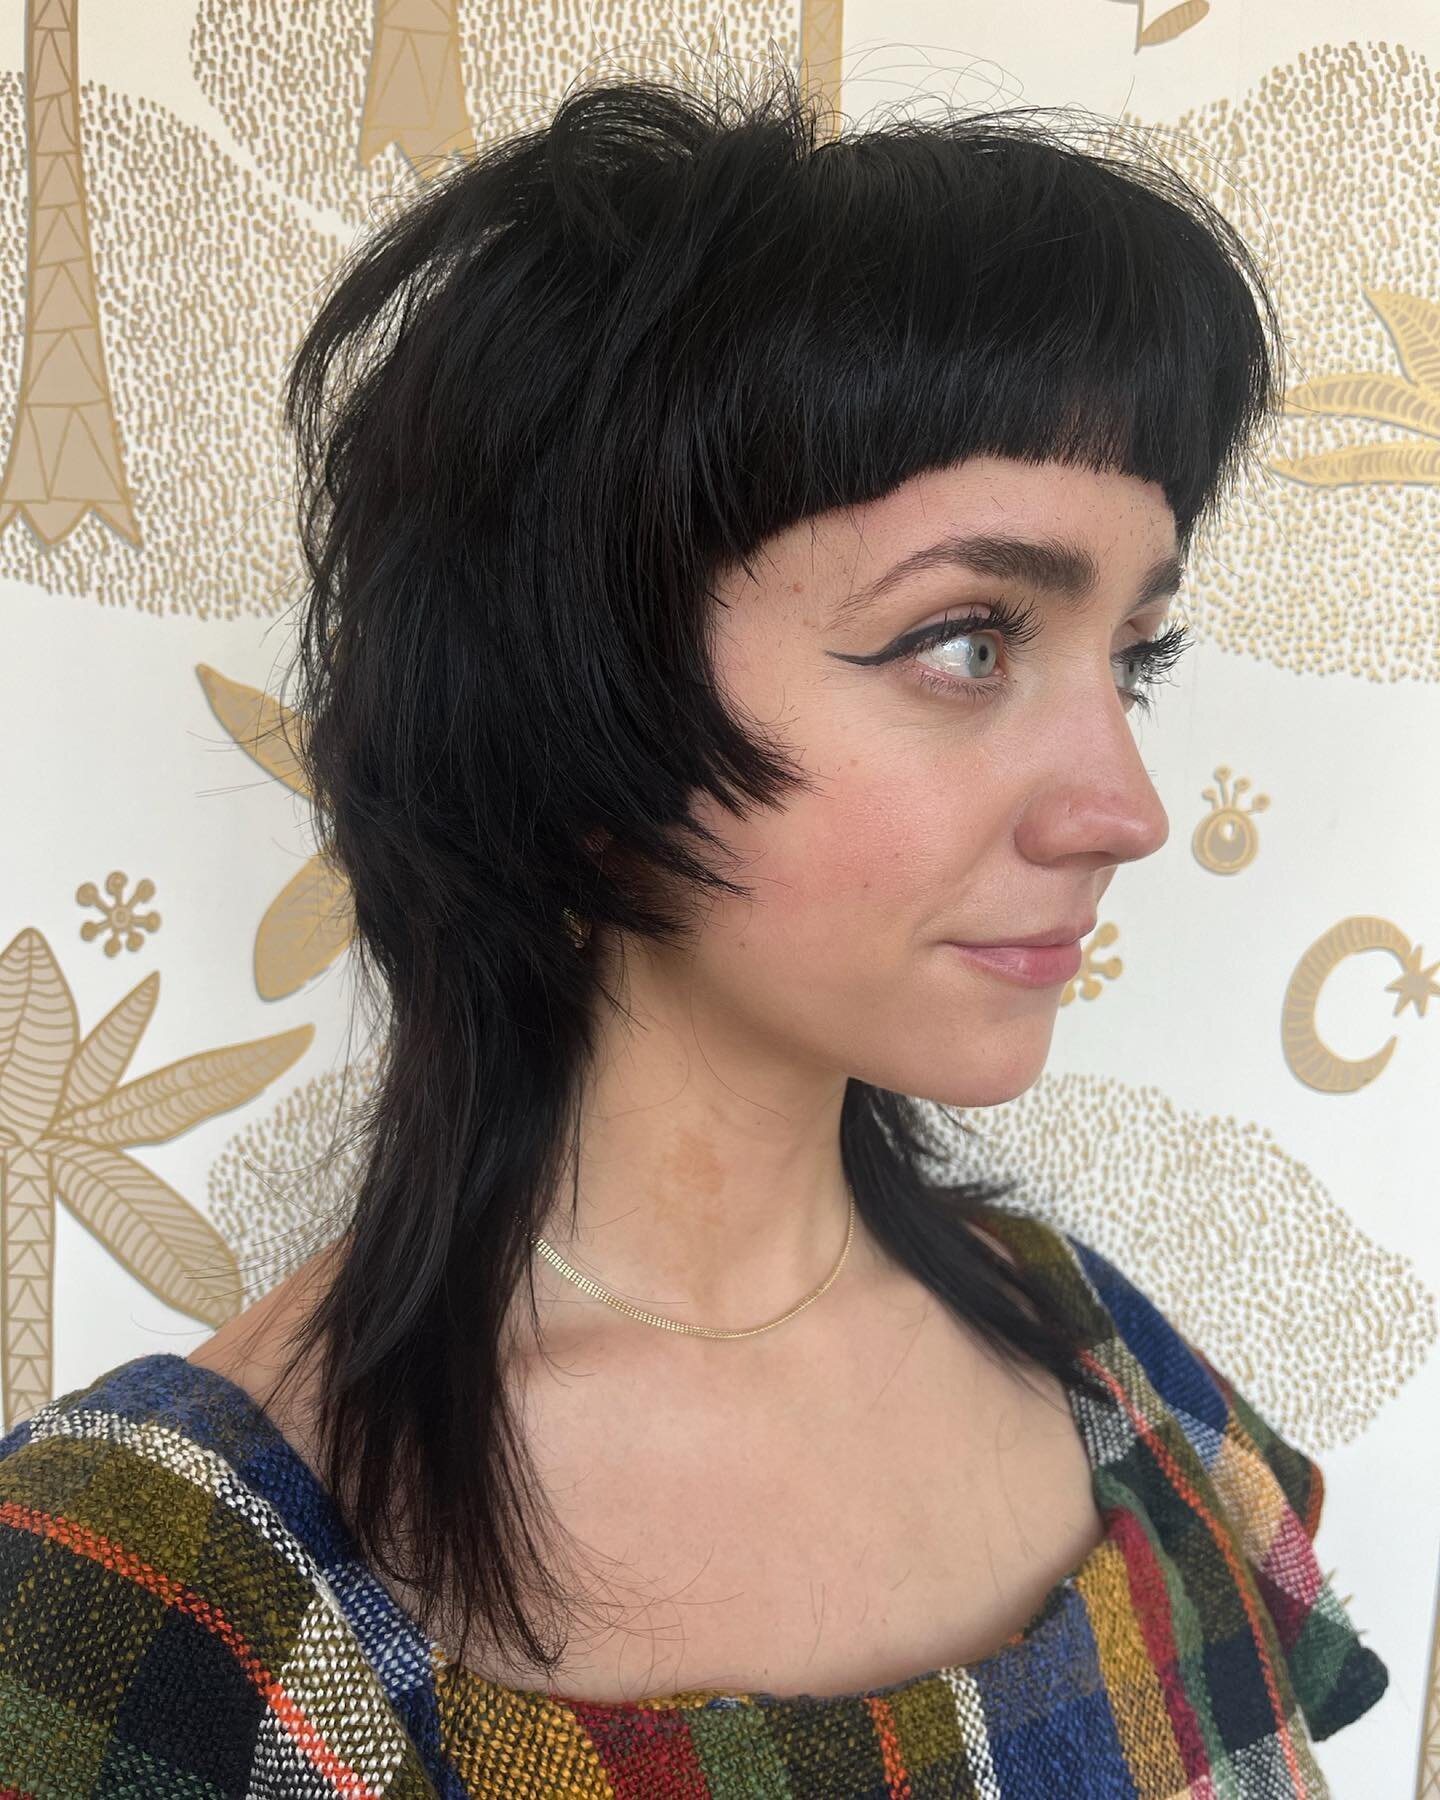 Groovy mullet shag with blunt bangs by Tina @tinalucchesidoeshair , styled with @cultandking Jelly, Vegan Balm and Setspray, done at Vacation Club 
.
.
.
 #vacationclub #vacationclubpdx #portlandsalon #humboldtneighborhood #humboldtportland #portland